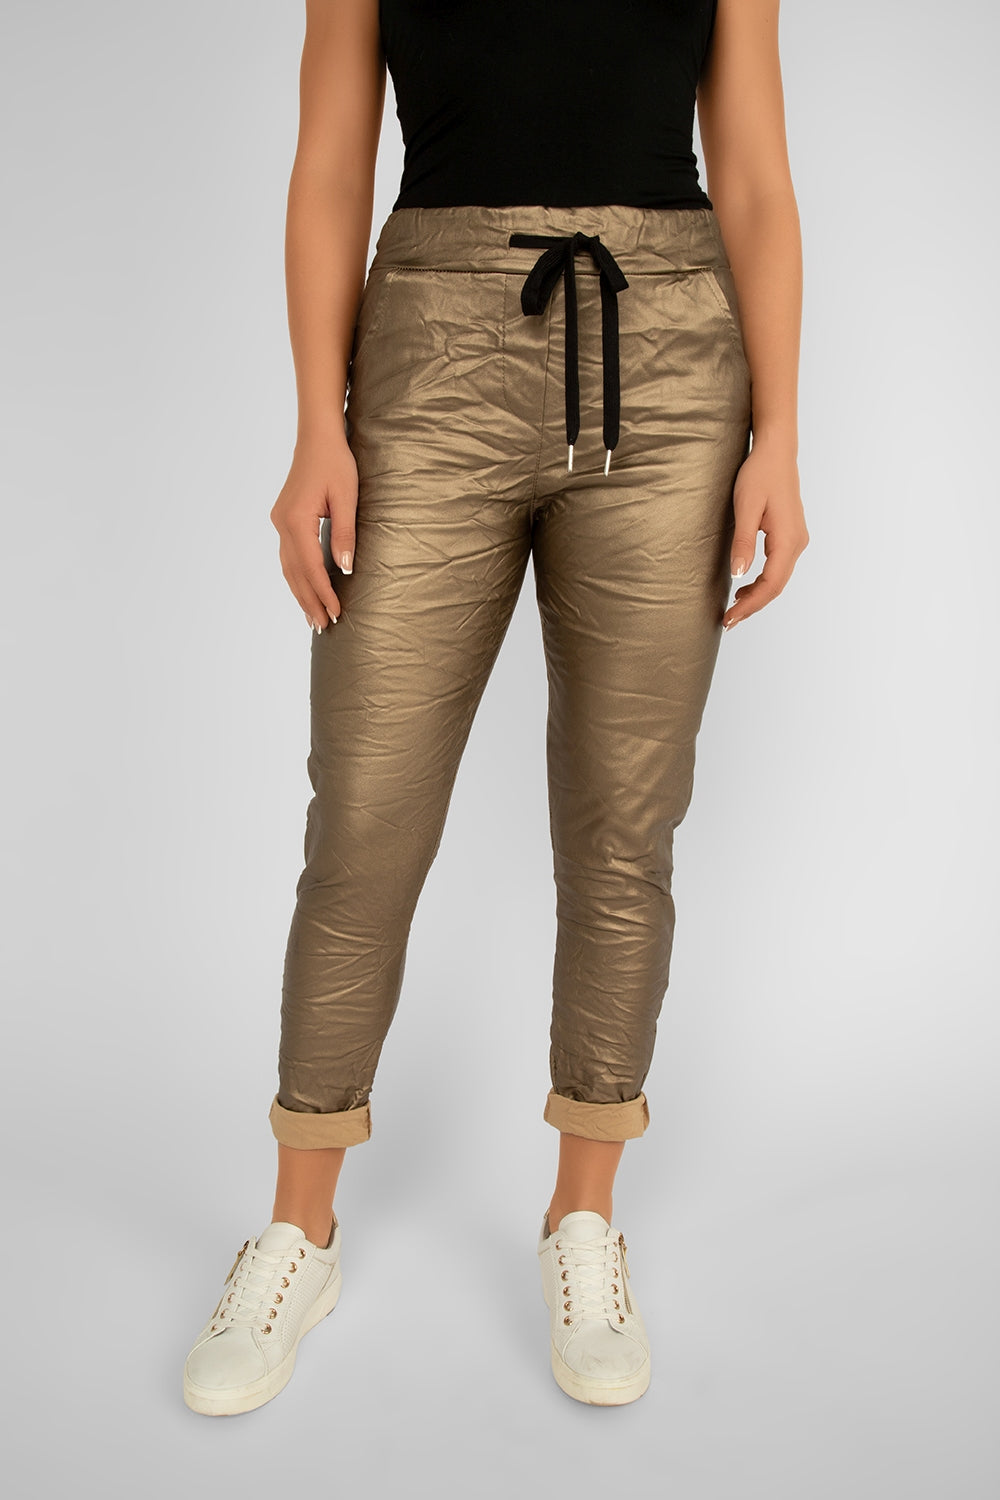 Women's Clothing ELISSIA (NF10930-2) Coated Pull-On Crinkled Pants in GOLD